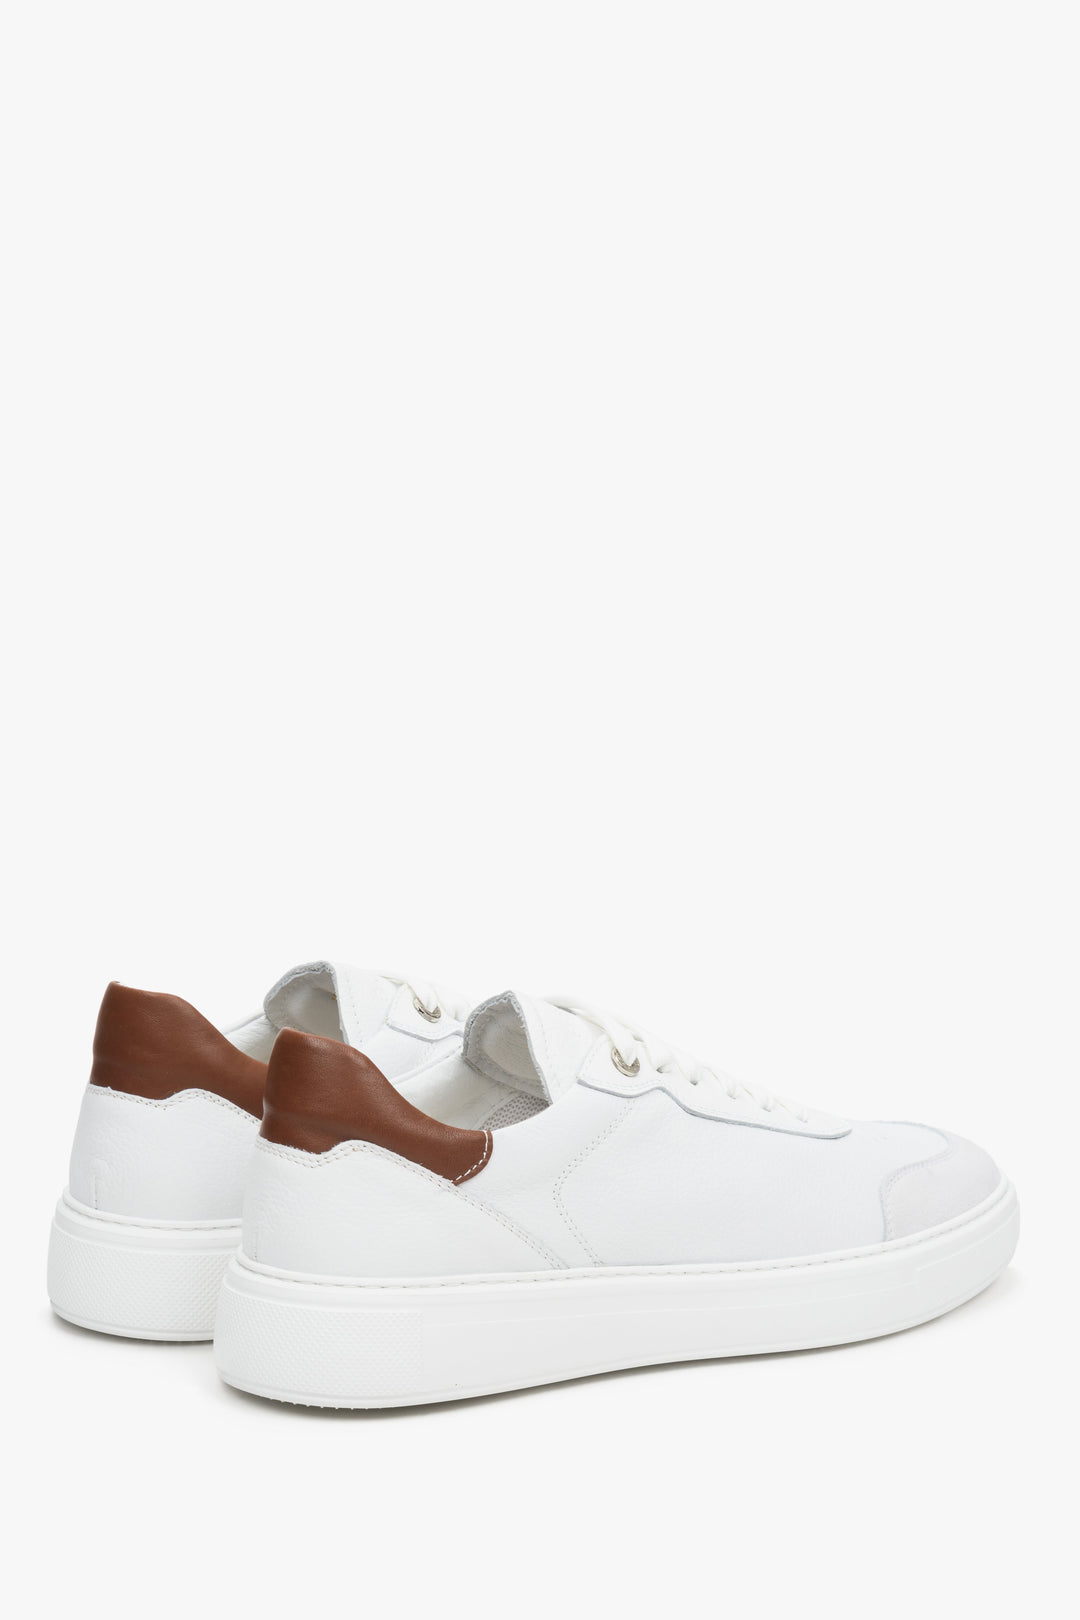 Sporty yet elegant men's sneakers in white natural leather and nubuck with brown details - prose up on the heel counter.